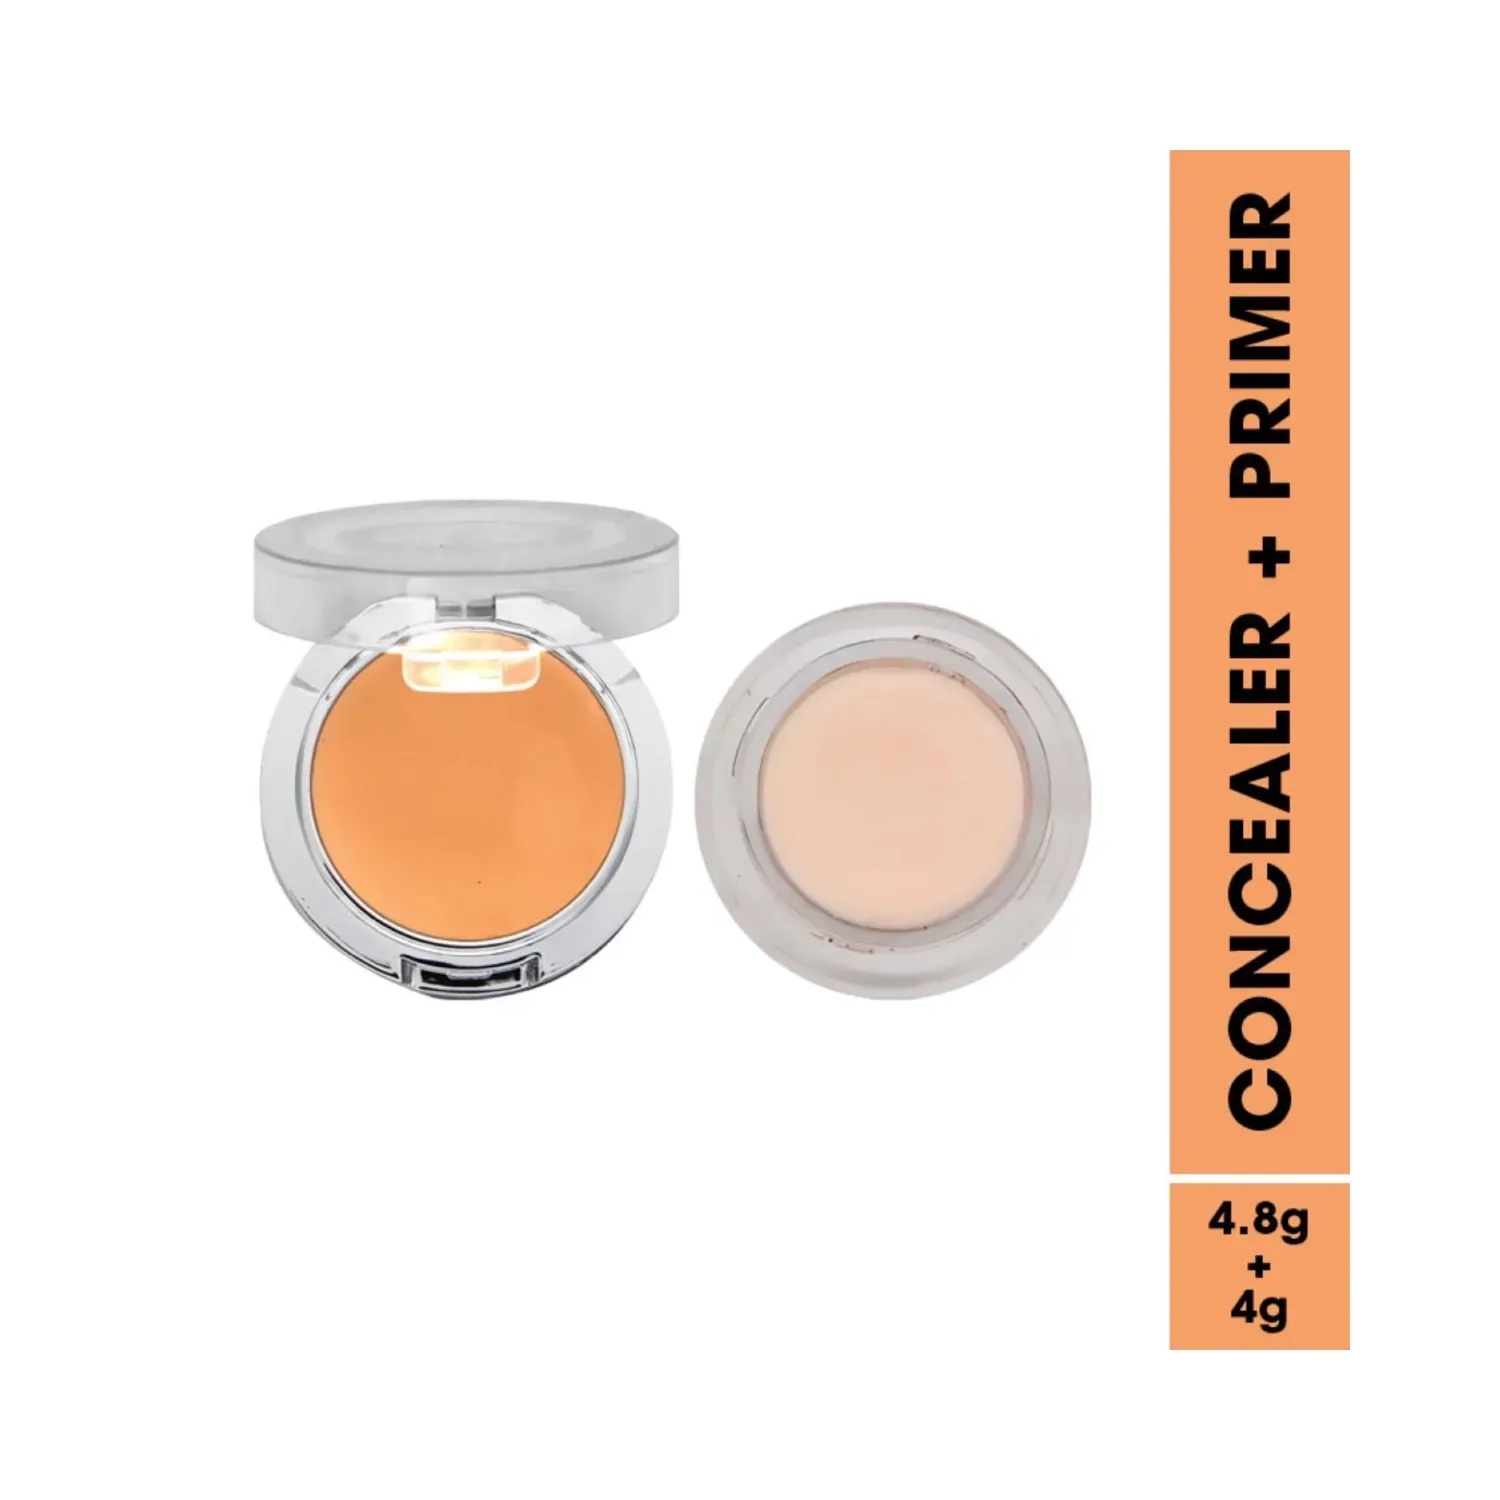 Fashion Colour | Fashion Colour 2-In-1 Primer And Concealer - 03 Shade (4.8g + 4g)